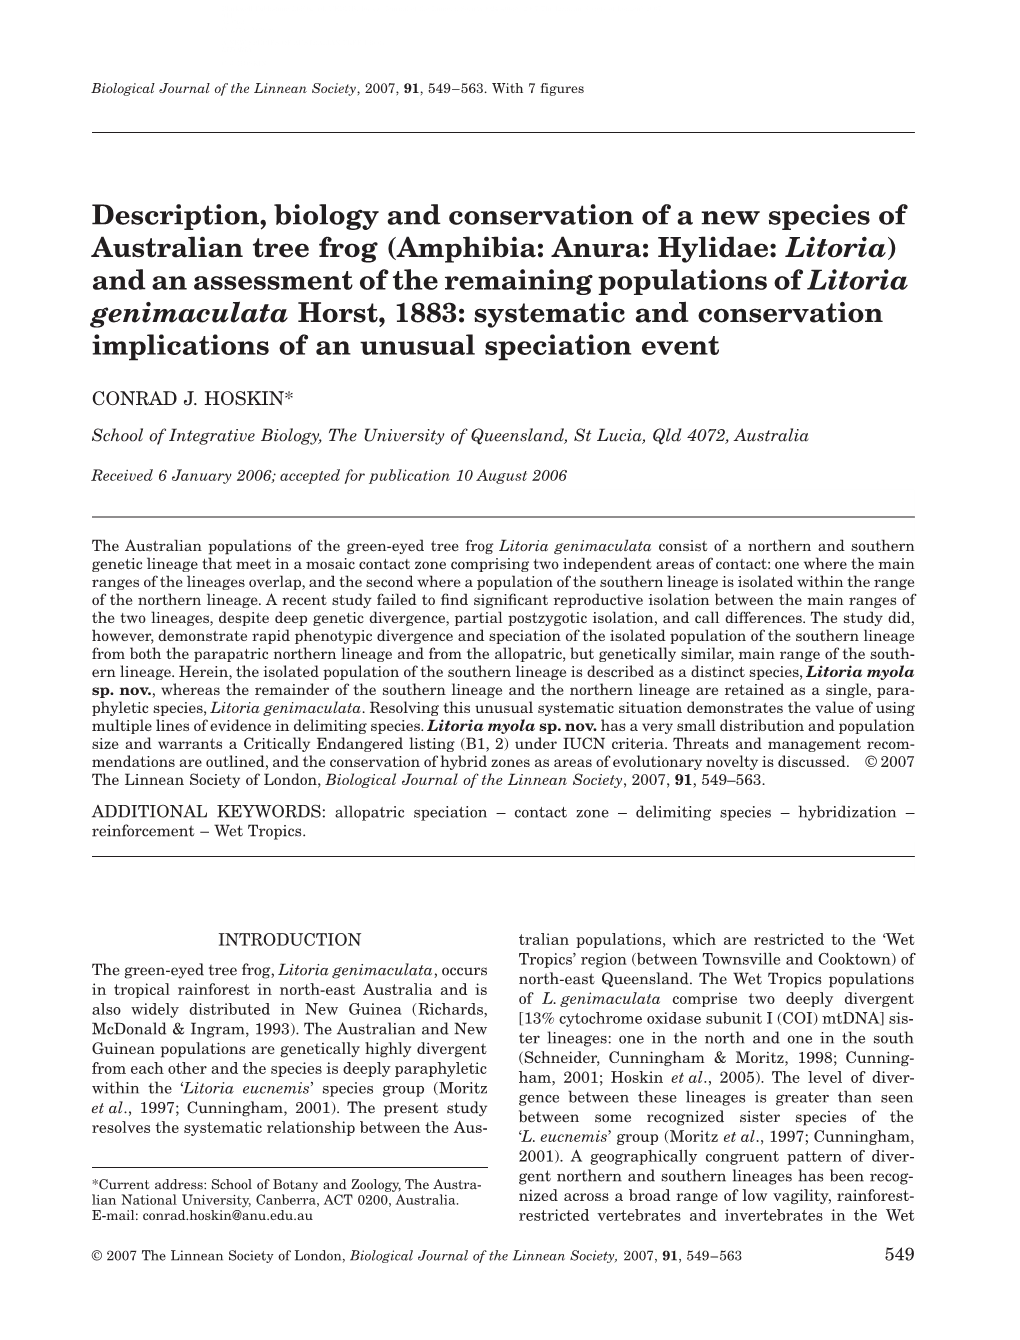 Description, Biology and Conservation of a New